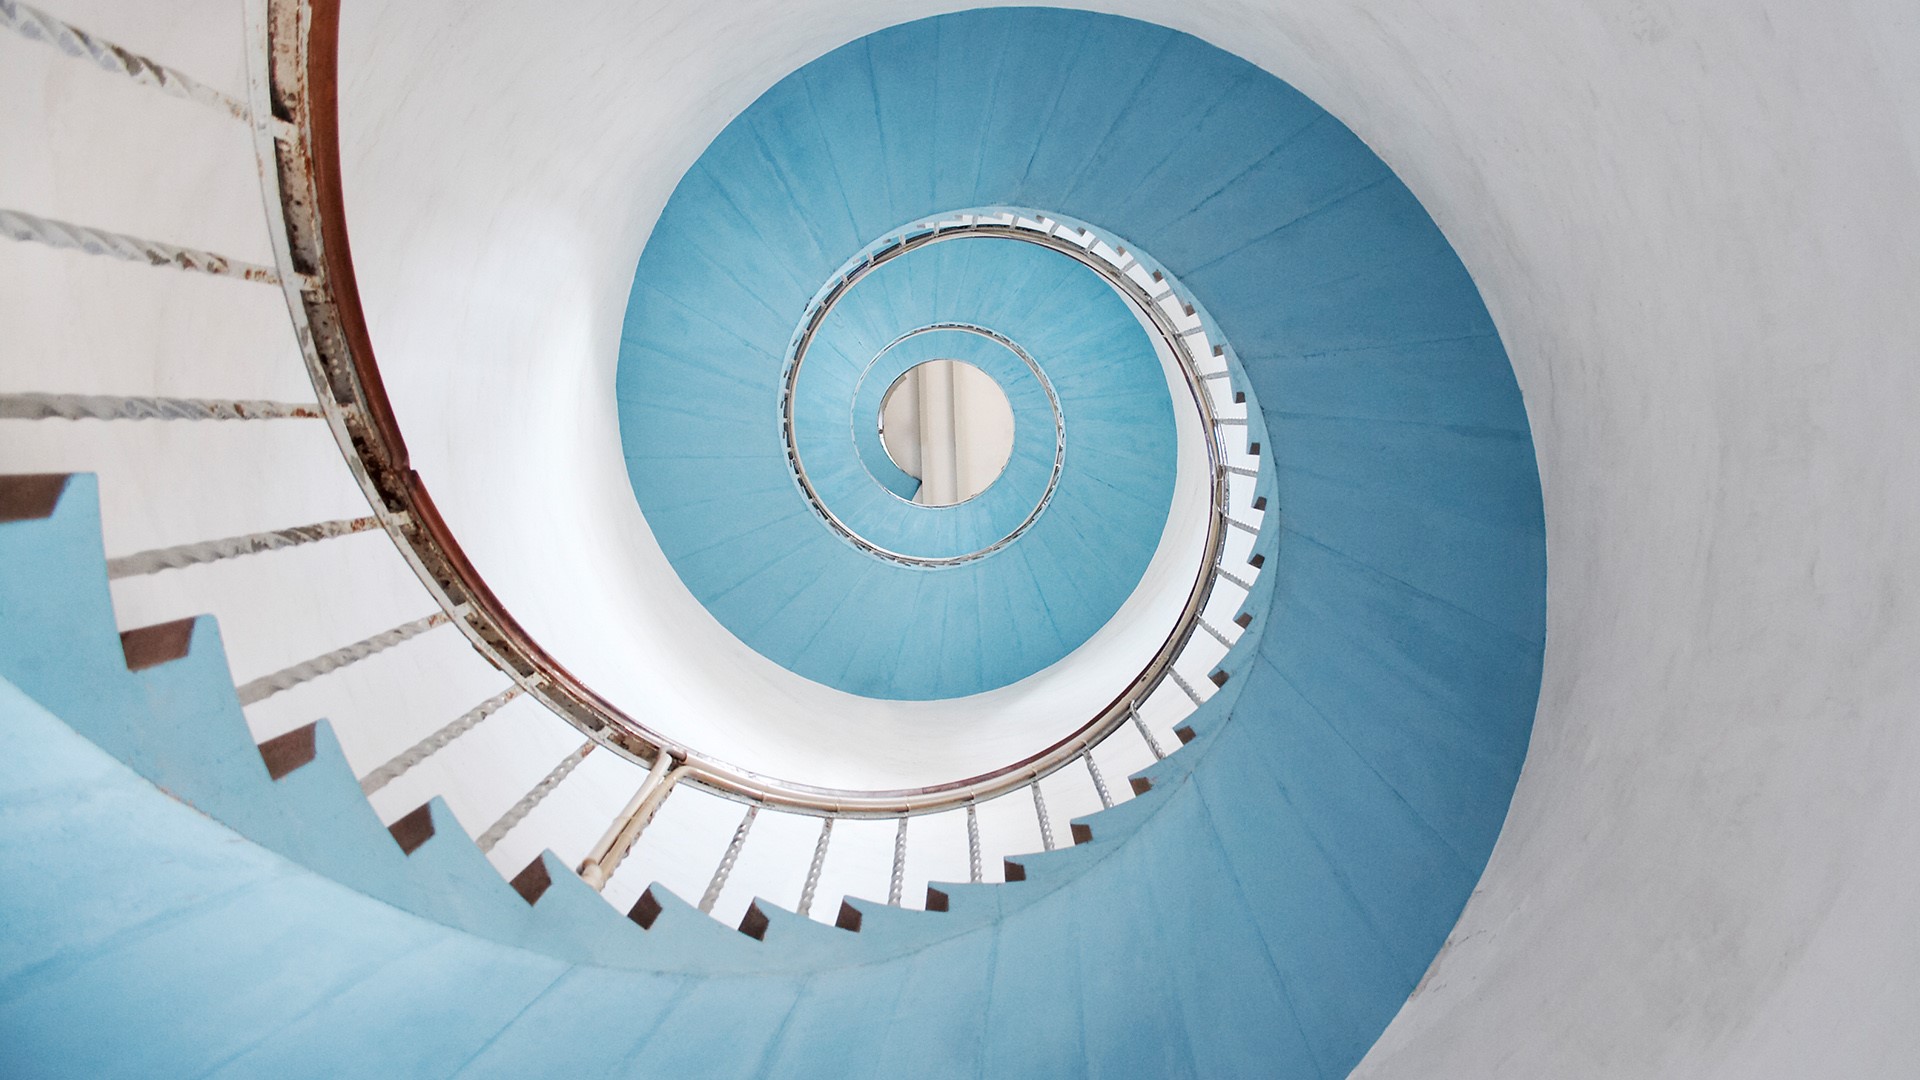 Architecture Stairs Blue Building Lyngvig Lighthouse Denmark 1920x1080